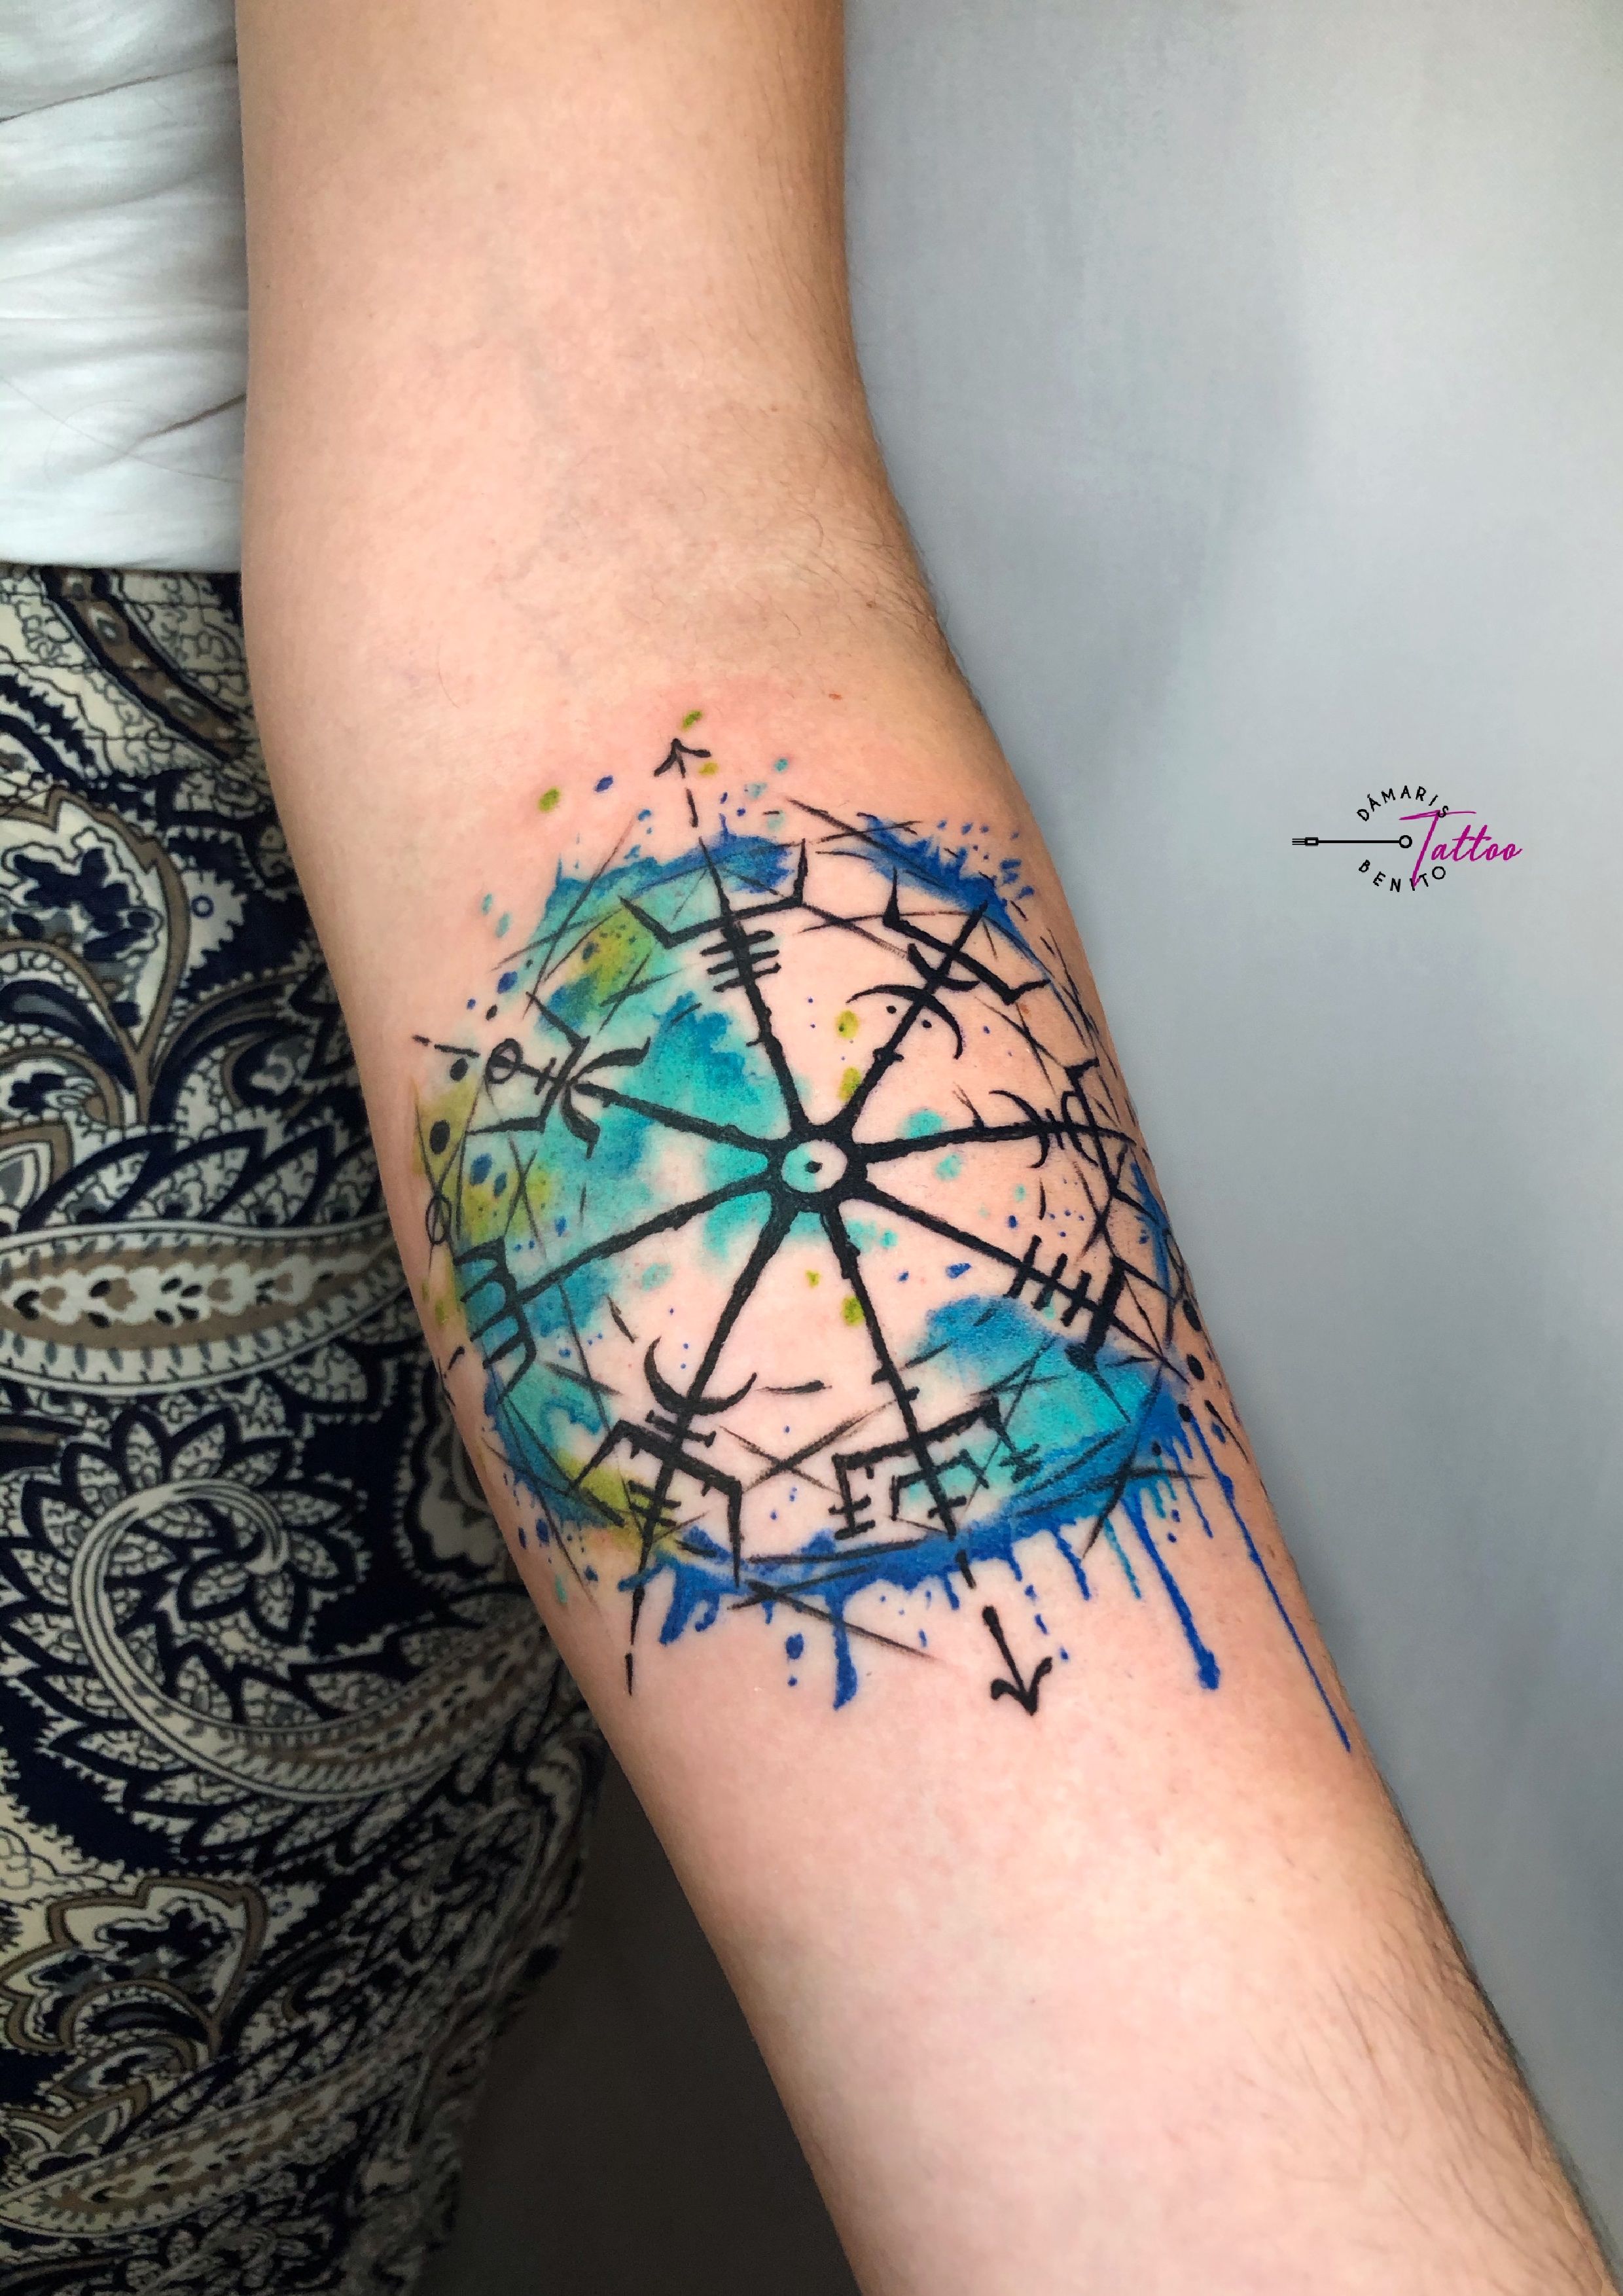 About  Awen Briem  Celtic  Sacred Geometry  Art With a Point  custom  tattoo  Minneapolis tattoo  lgbtq tattoo  Geometric tattoos  Nature  Tattoos  Art With A Point